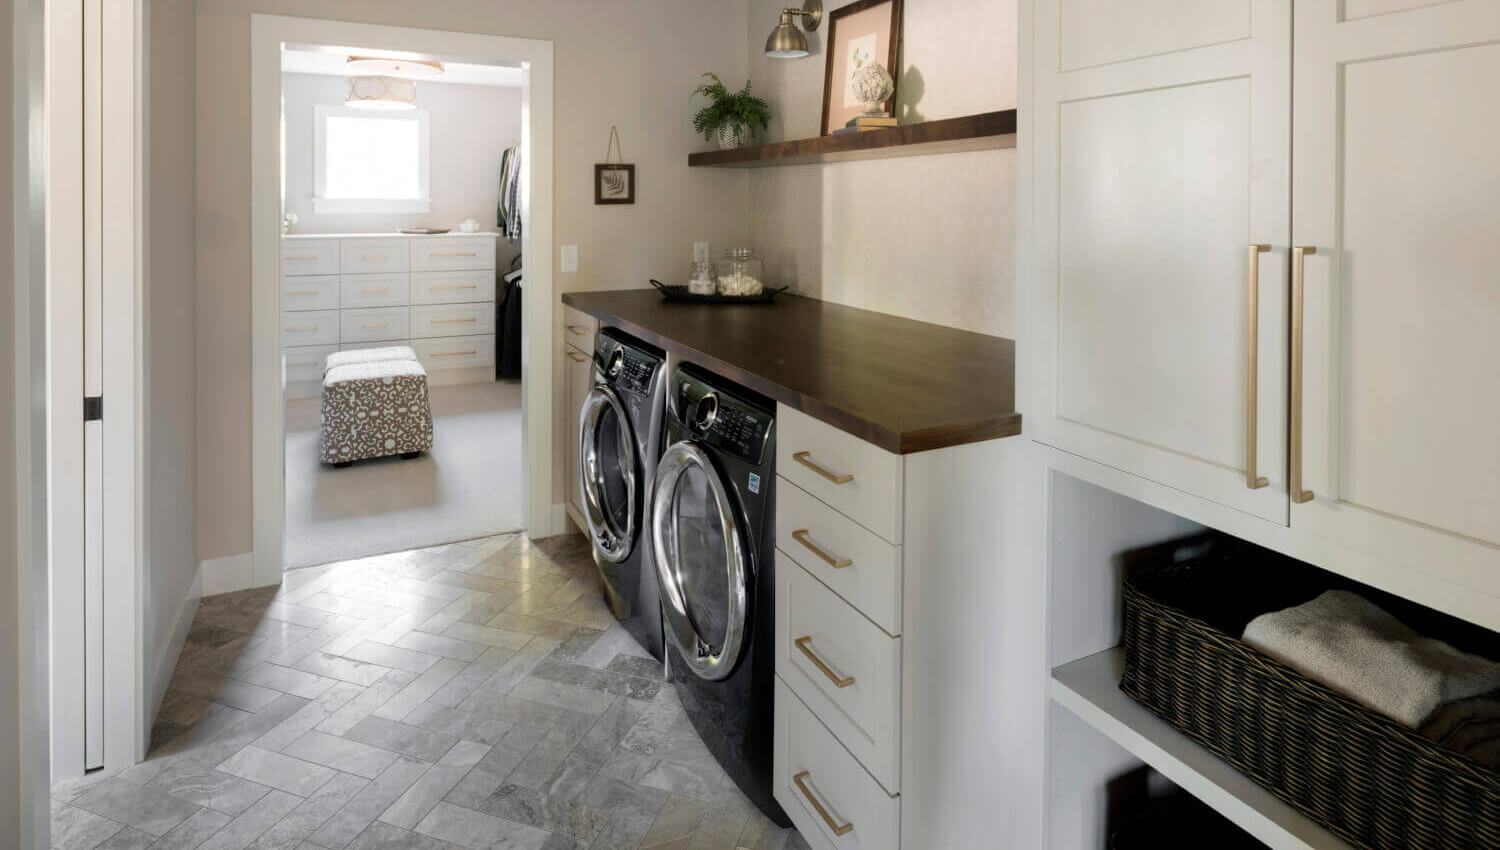 This laundry room is part of the master bedroom's grand walk-in closet. The off-white painted cabinets feature a classic shaker door style.